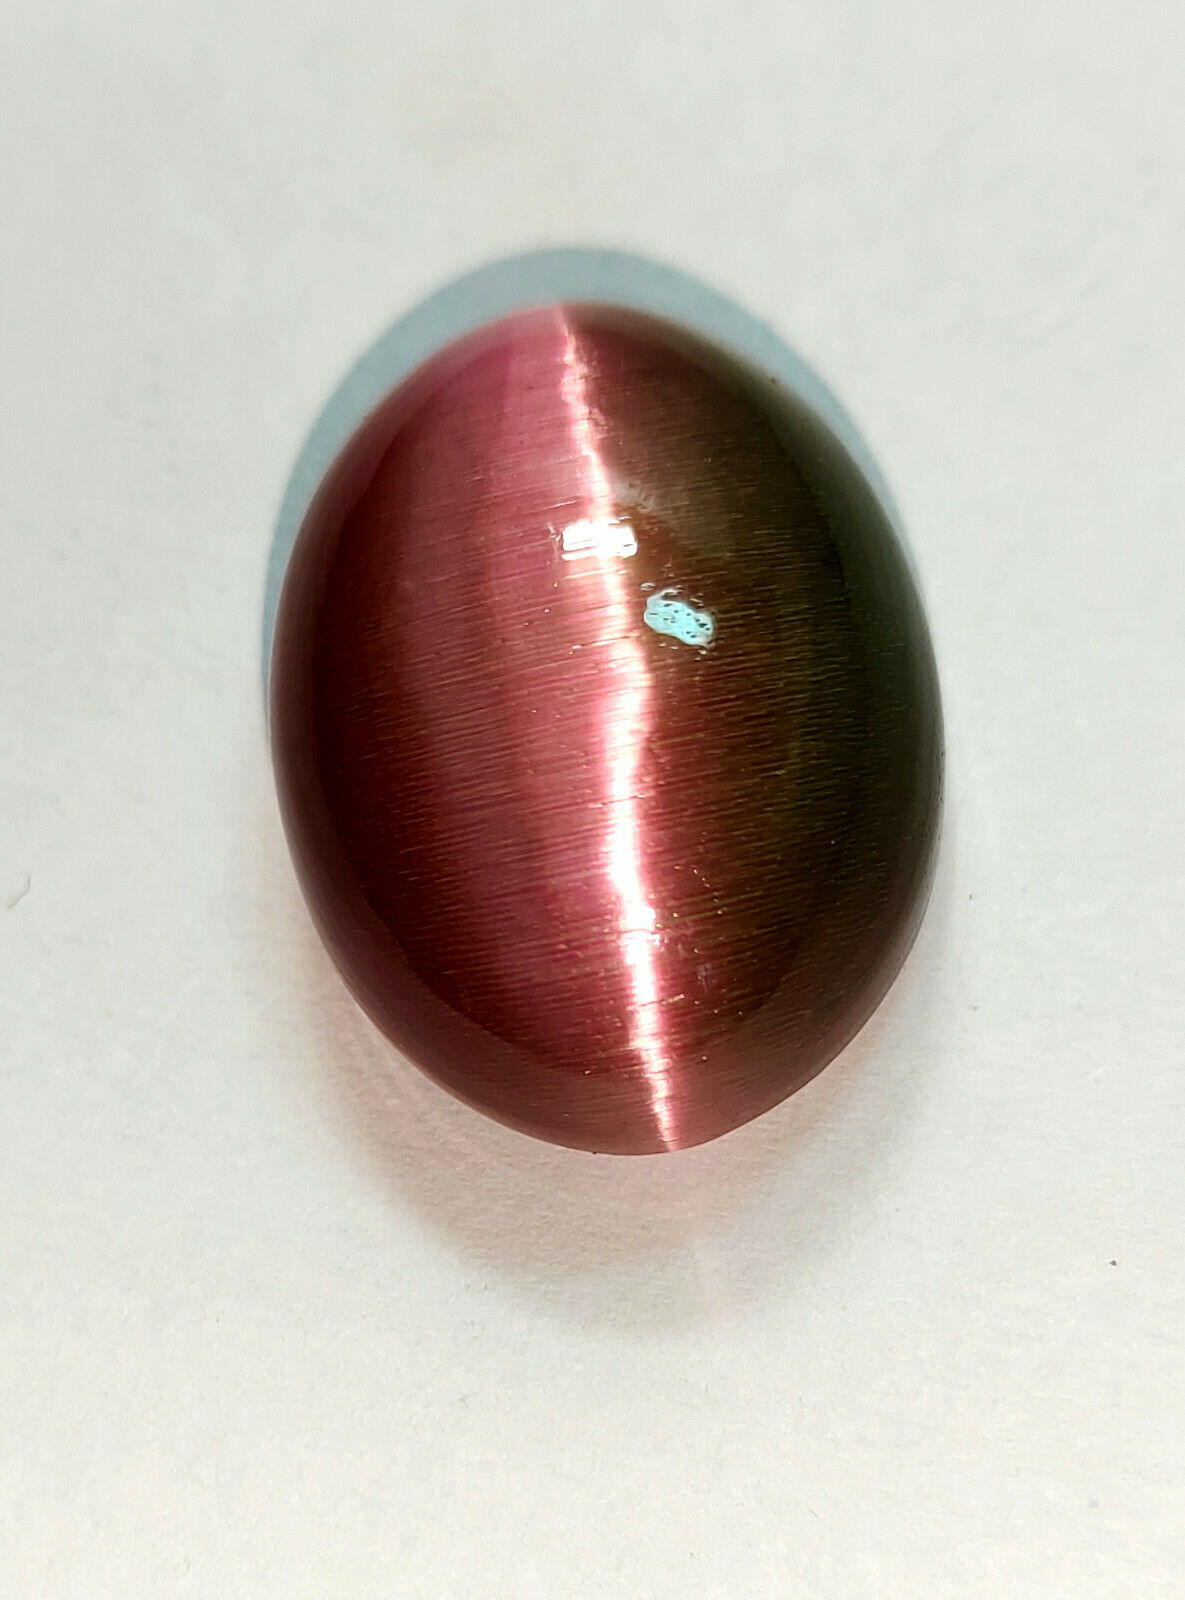 64 Crt Natural Cats Eye Chrysoberyl Pink Color Oval Cabochon Gemstone